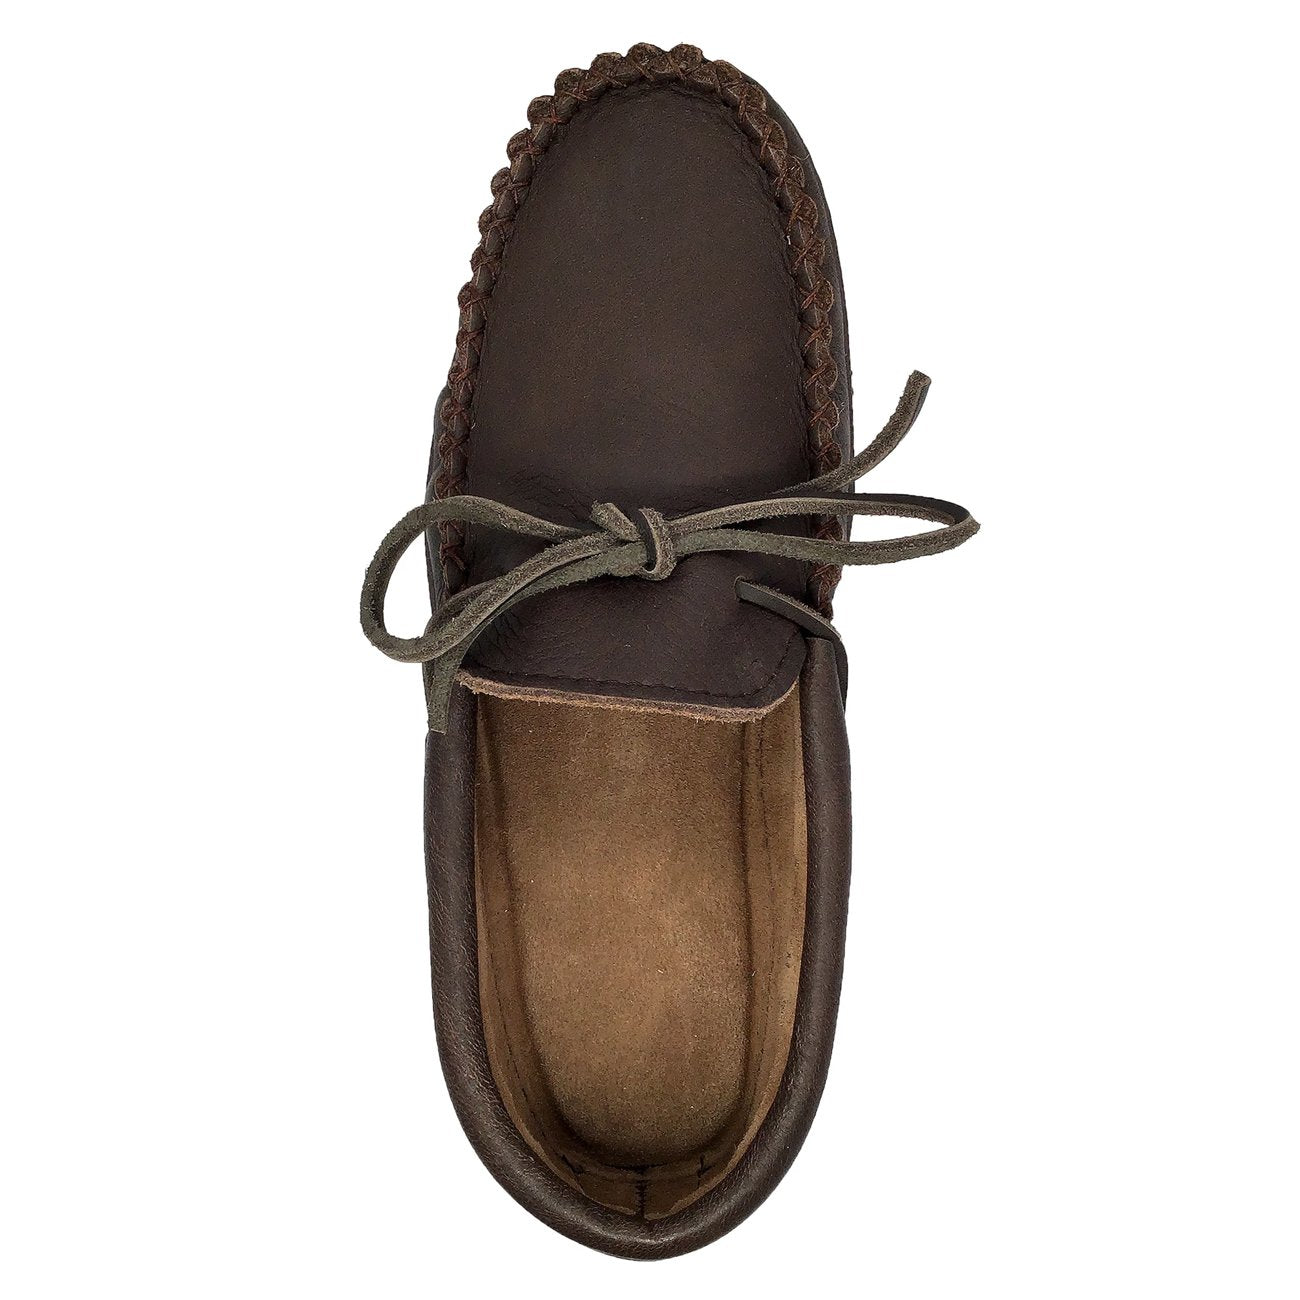 Men's Earthing Moccasin Shoes with Copper Rivet Rubber Soles